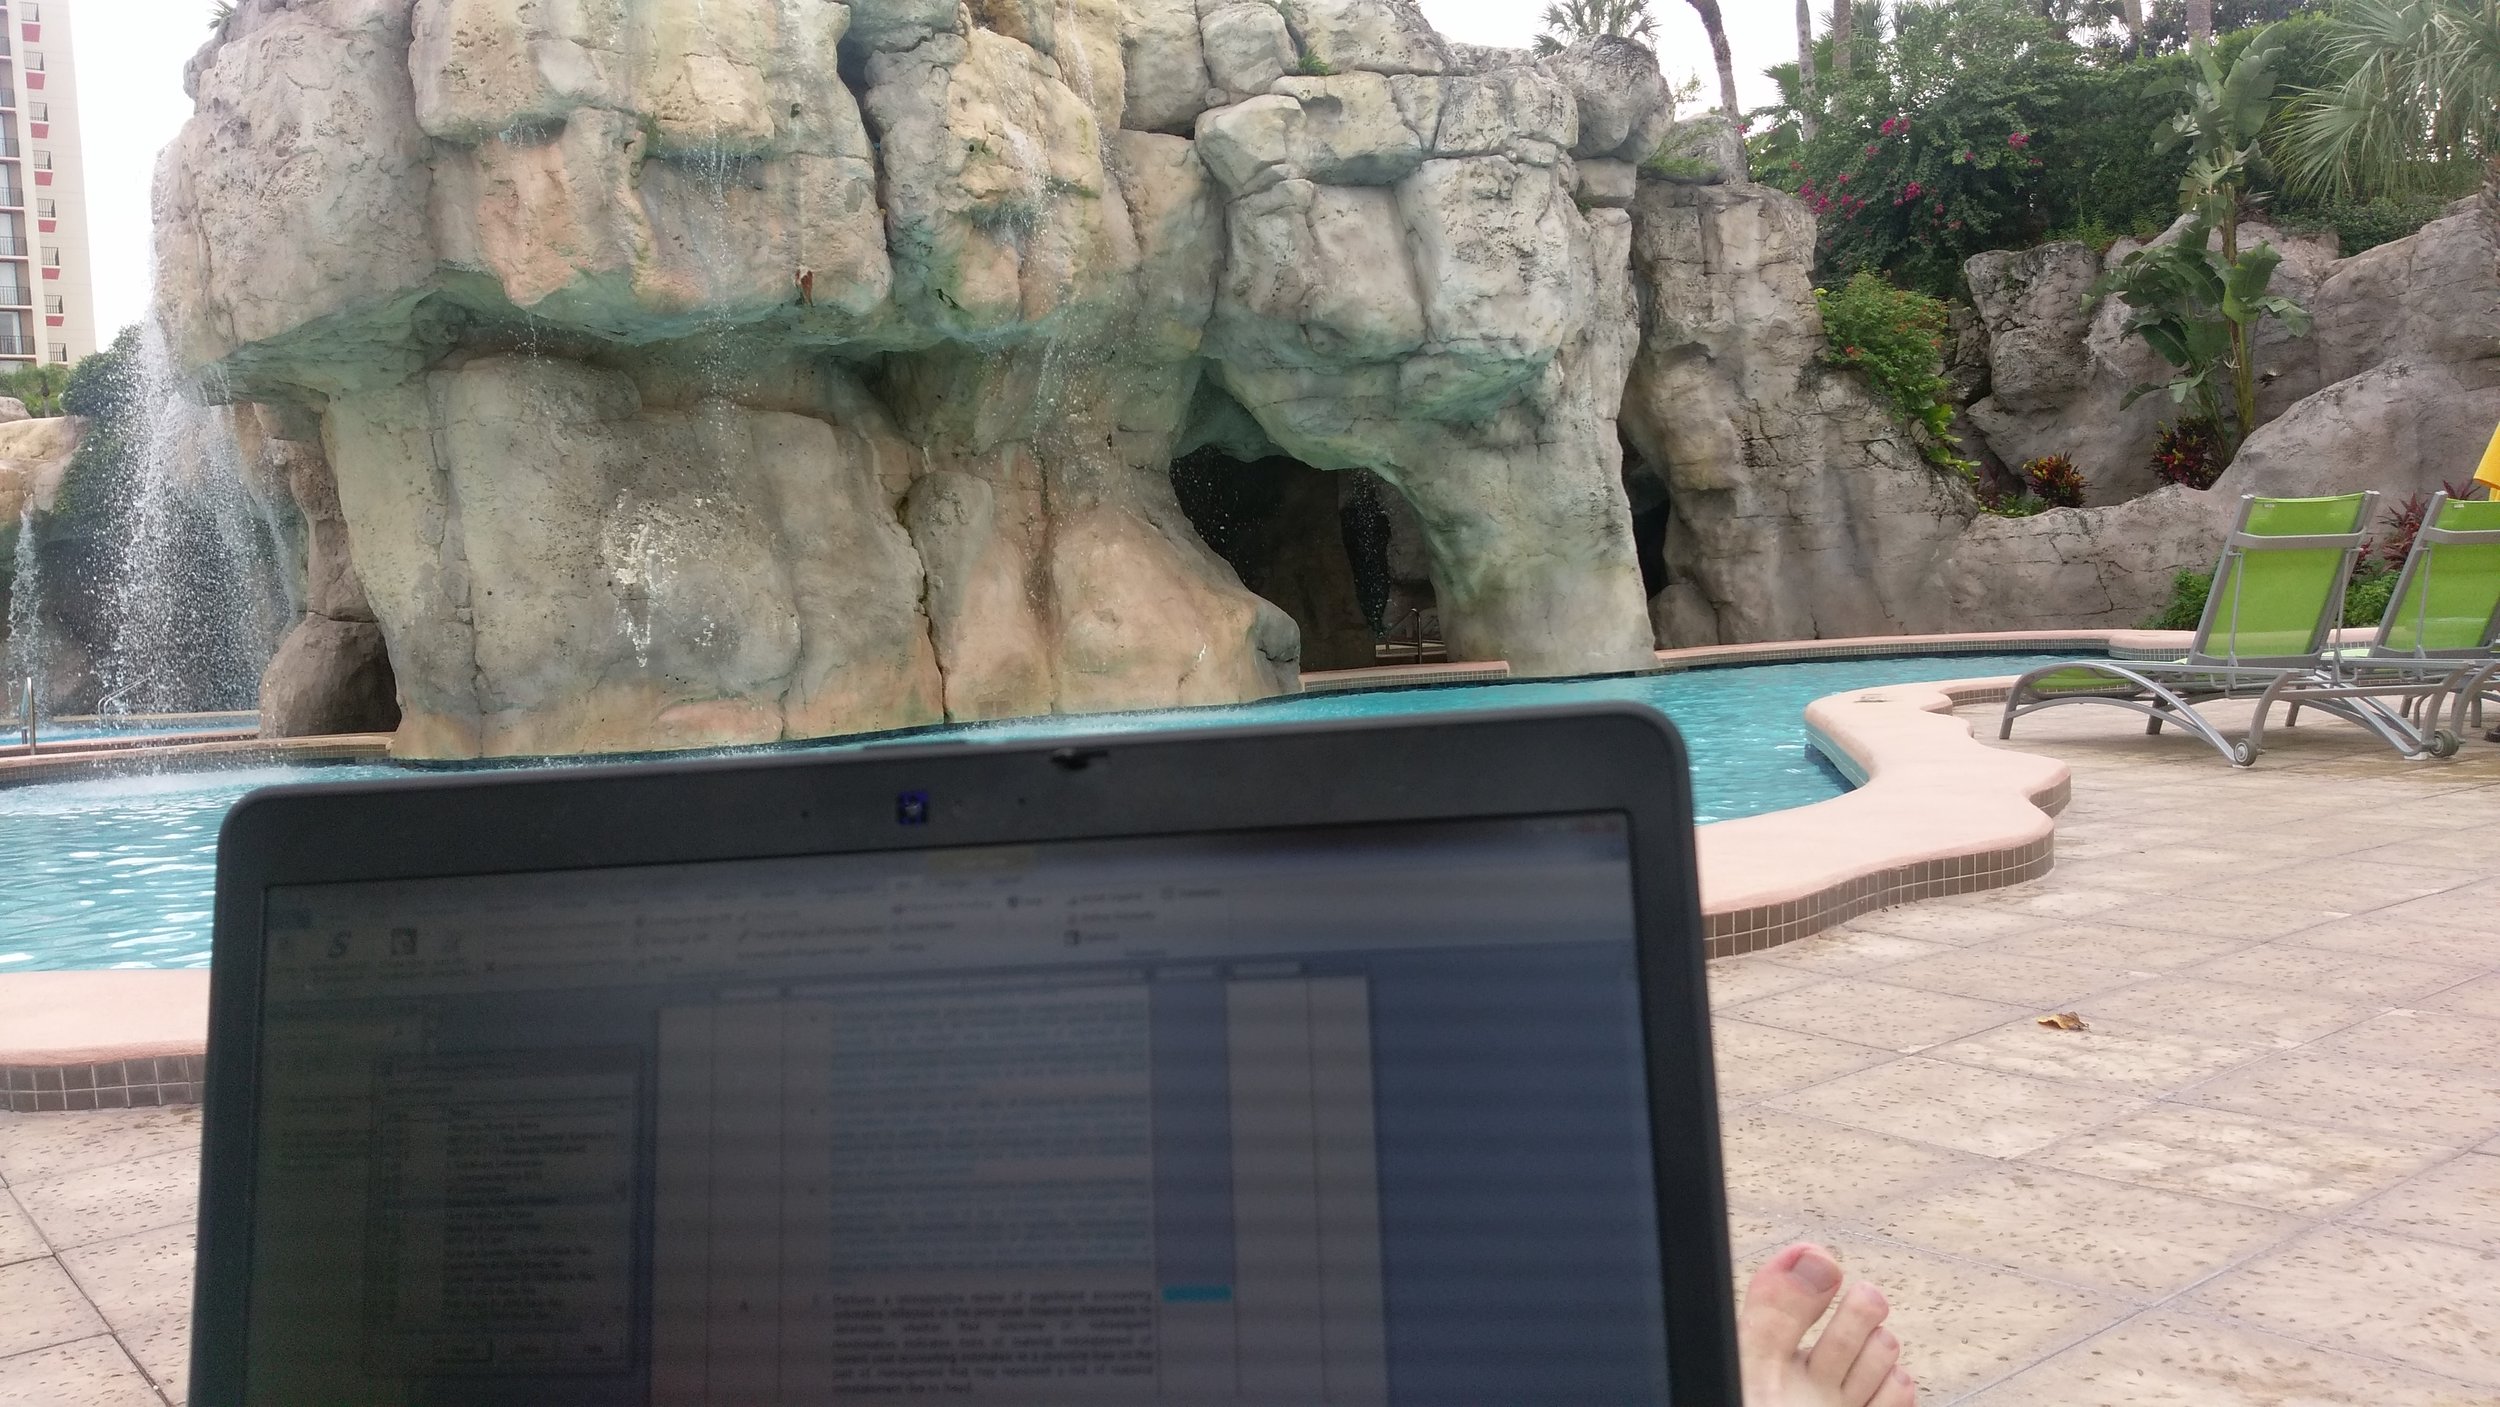 Working by the pool